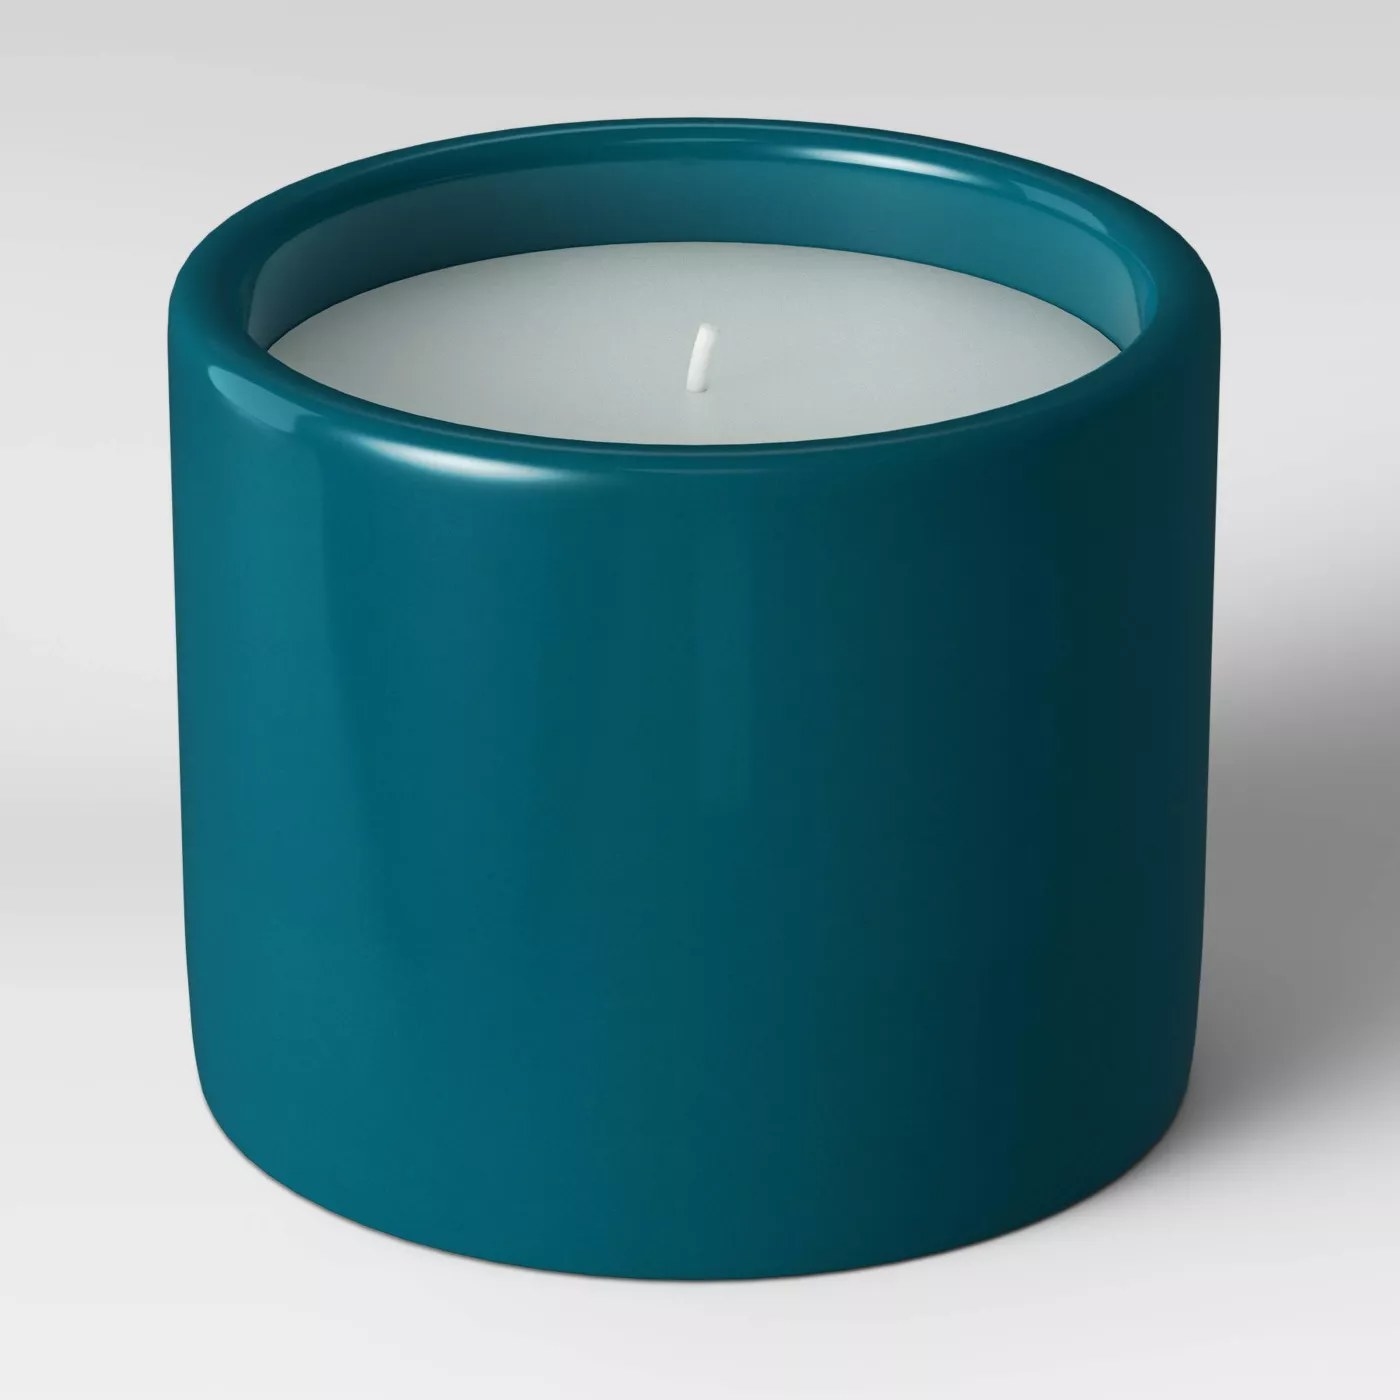 The candle in a green ceramic holder